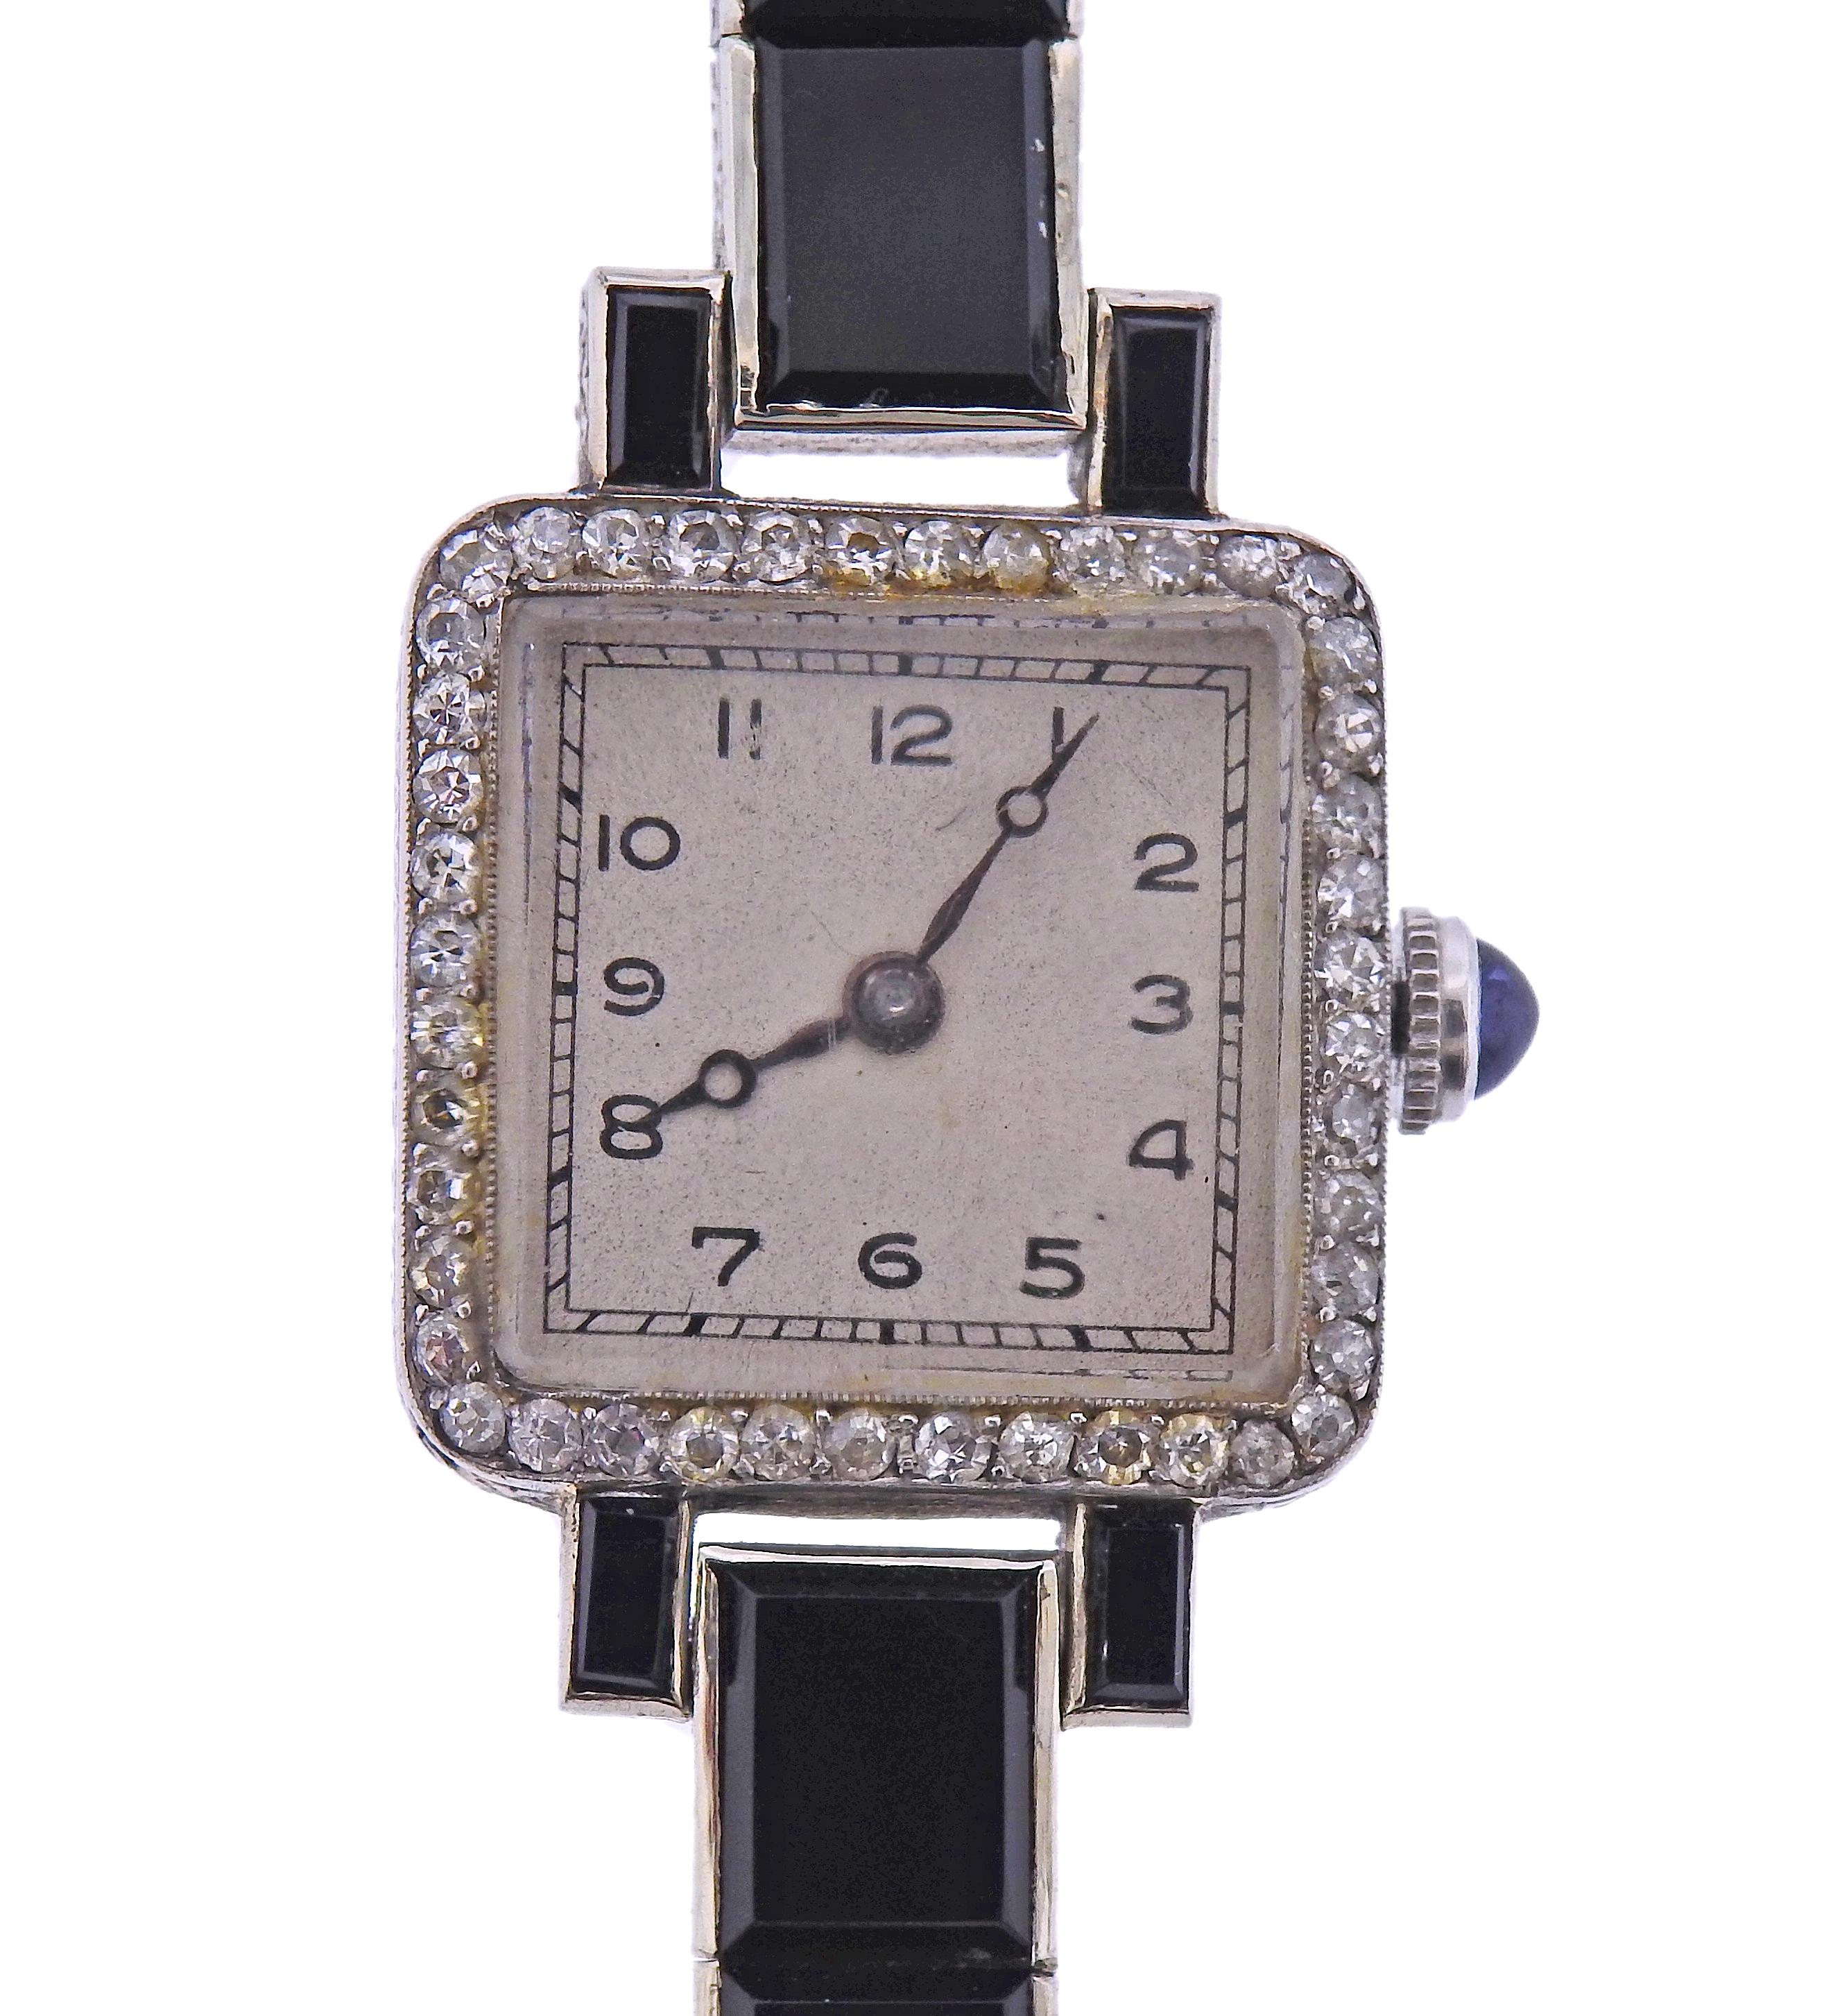 Iconic Art Deco platinum lady's watch, decorated with onyx, diamonds and blue sapphire crown. Manual wind movement in working order. Bracelet is 6.5